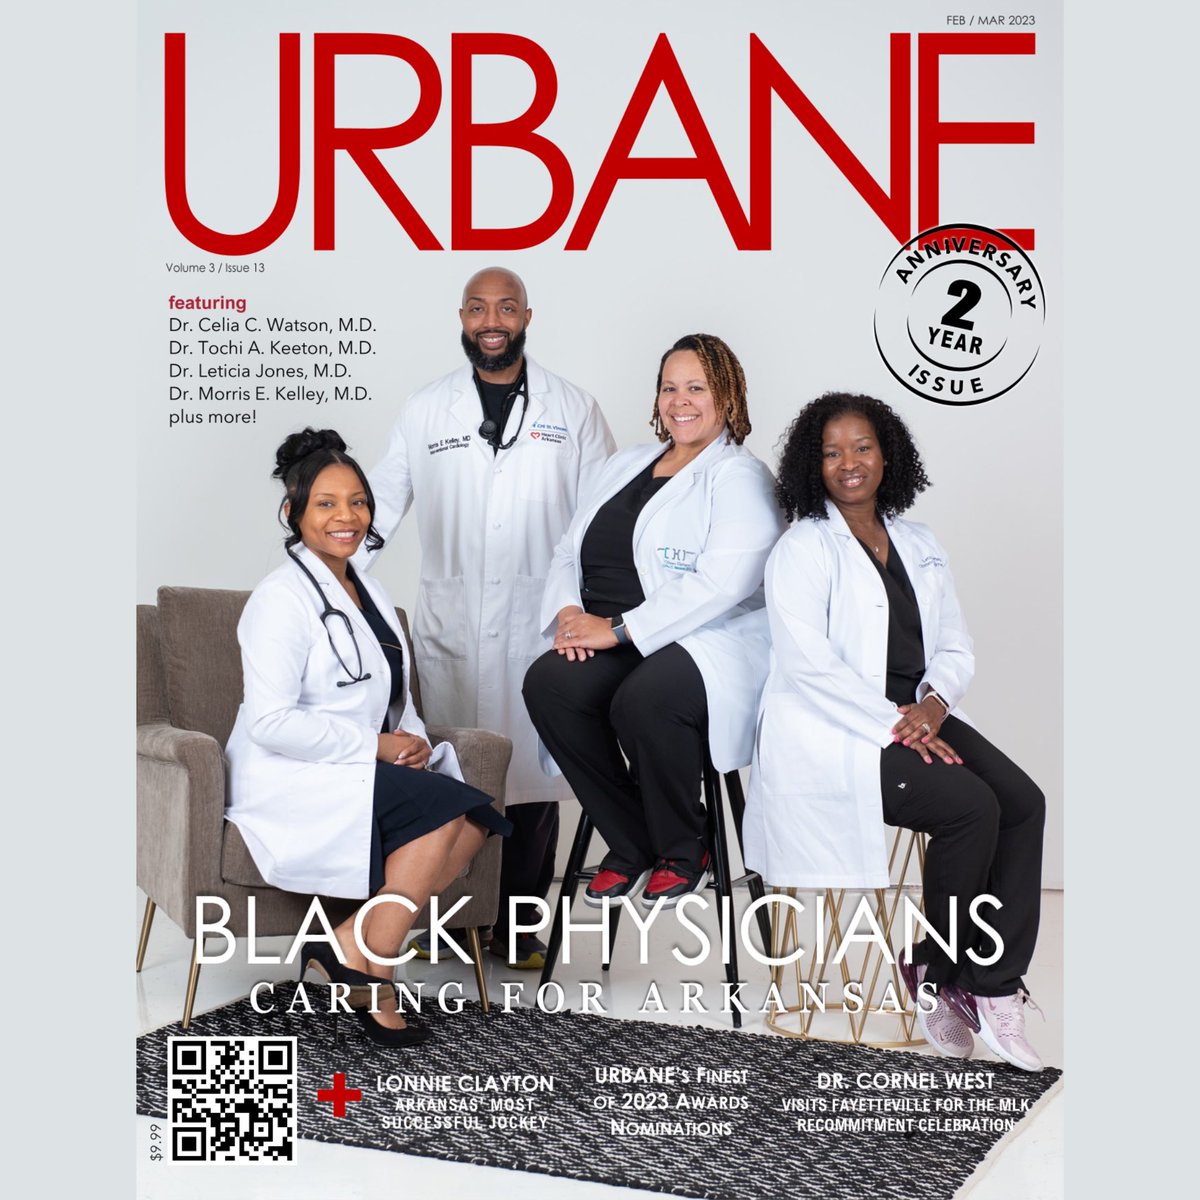 Stop by the URBANE Magazine booth at the 2023 UAMS Midsouth Black Expo!!

We’ll have our current issue, official URBANE merch, previous URBANE issues, AND the Volume 2 Anniversary Gift Set available ($65) - all while supplies last!

#BlackExpo #BlackBusinesses #URBANEArkansas